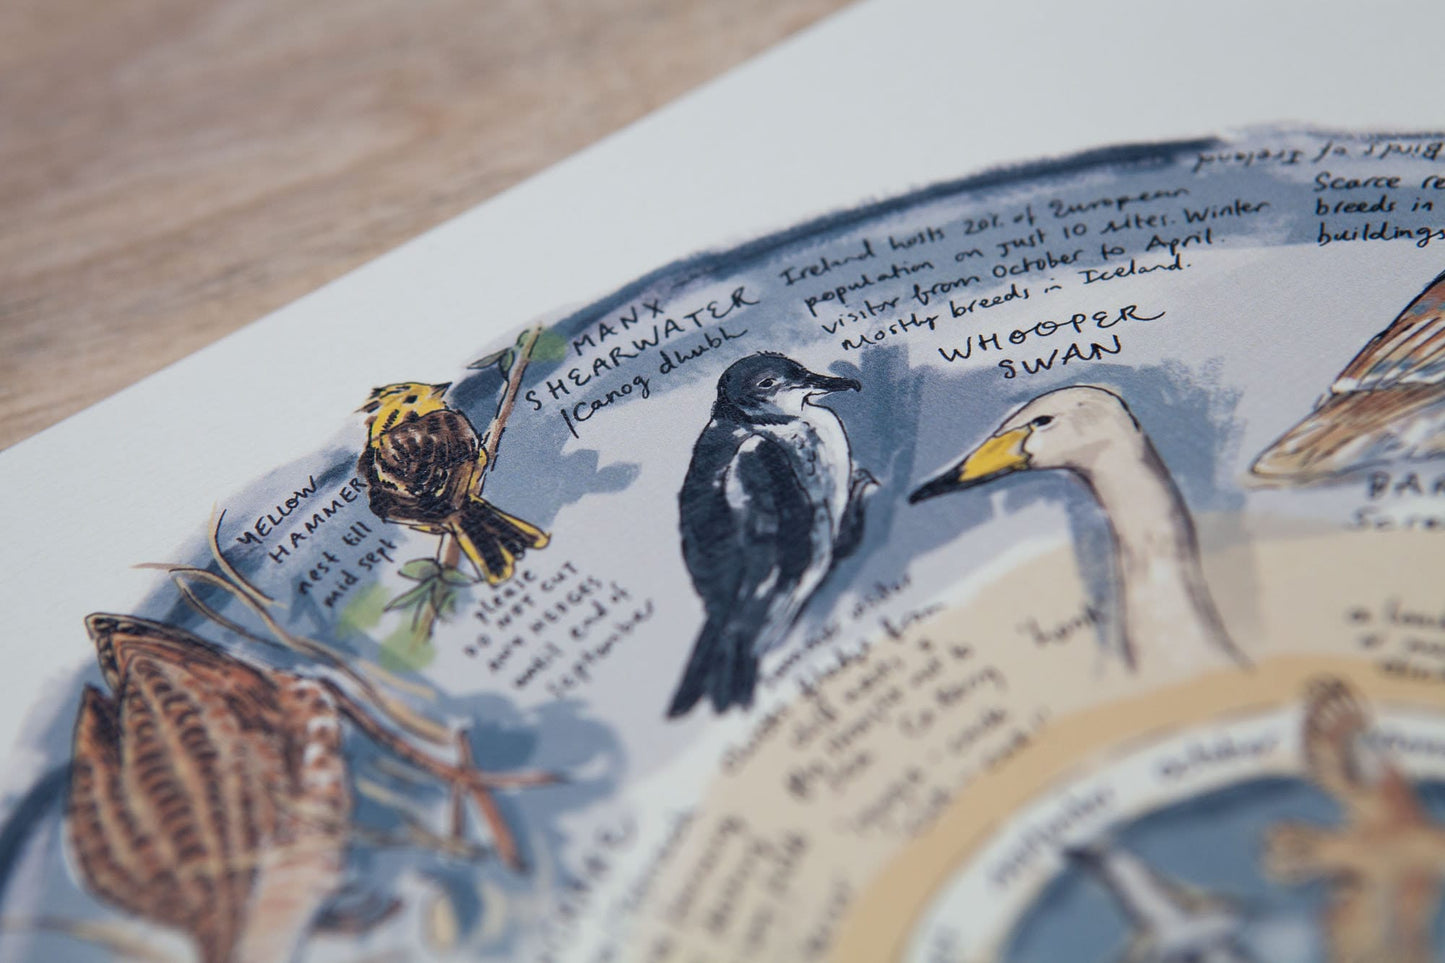 Some Rare Birds of Ireland — Limited Edition Print on Paper